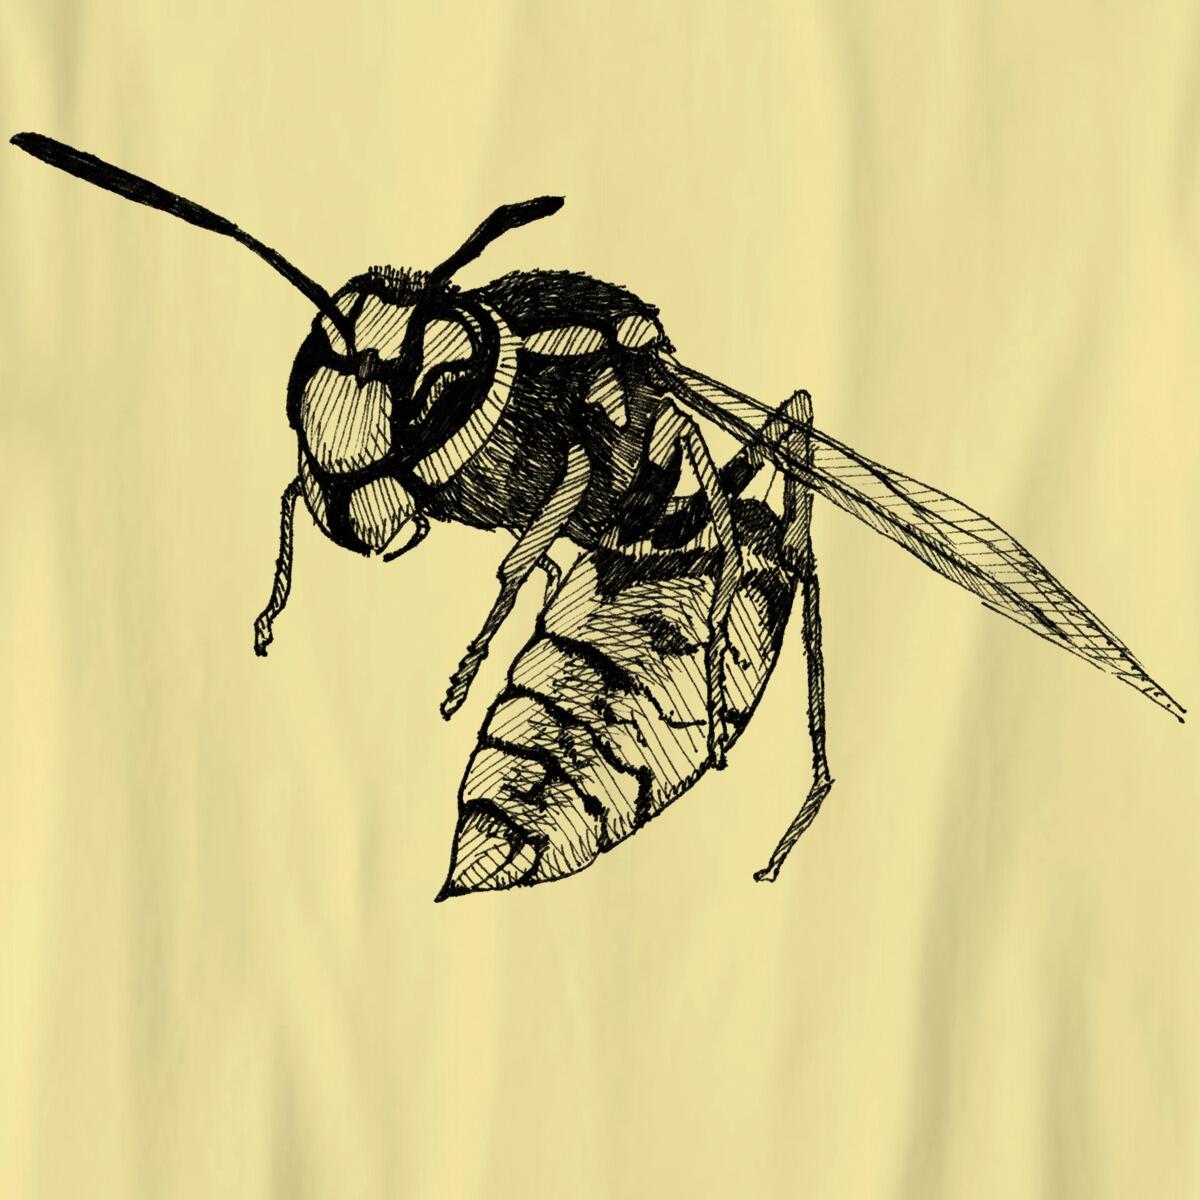 Wasp drawing in black